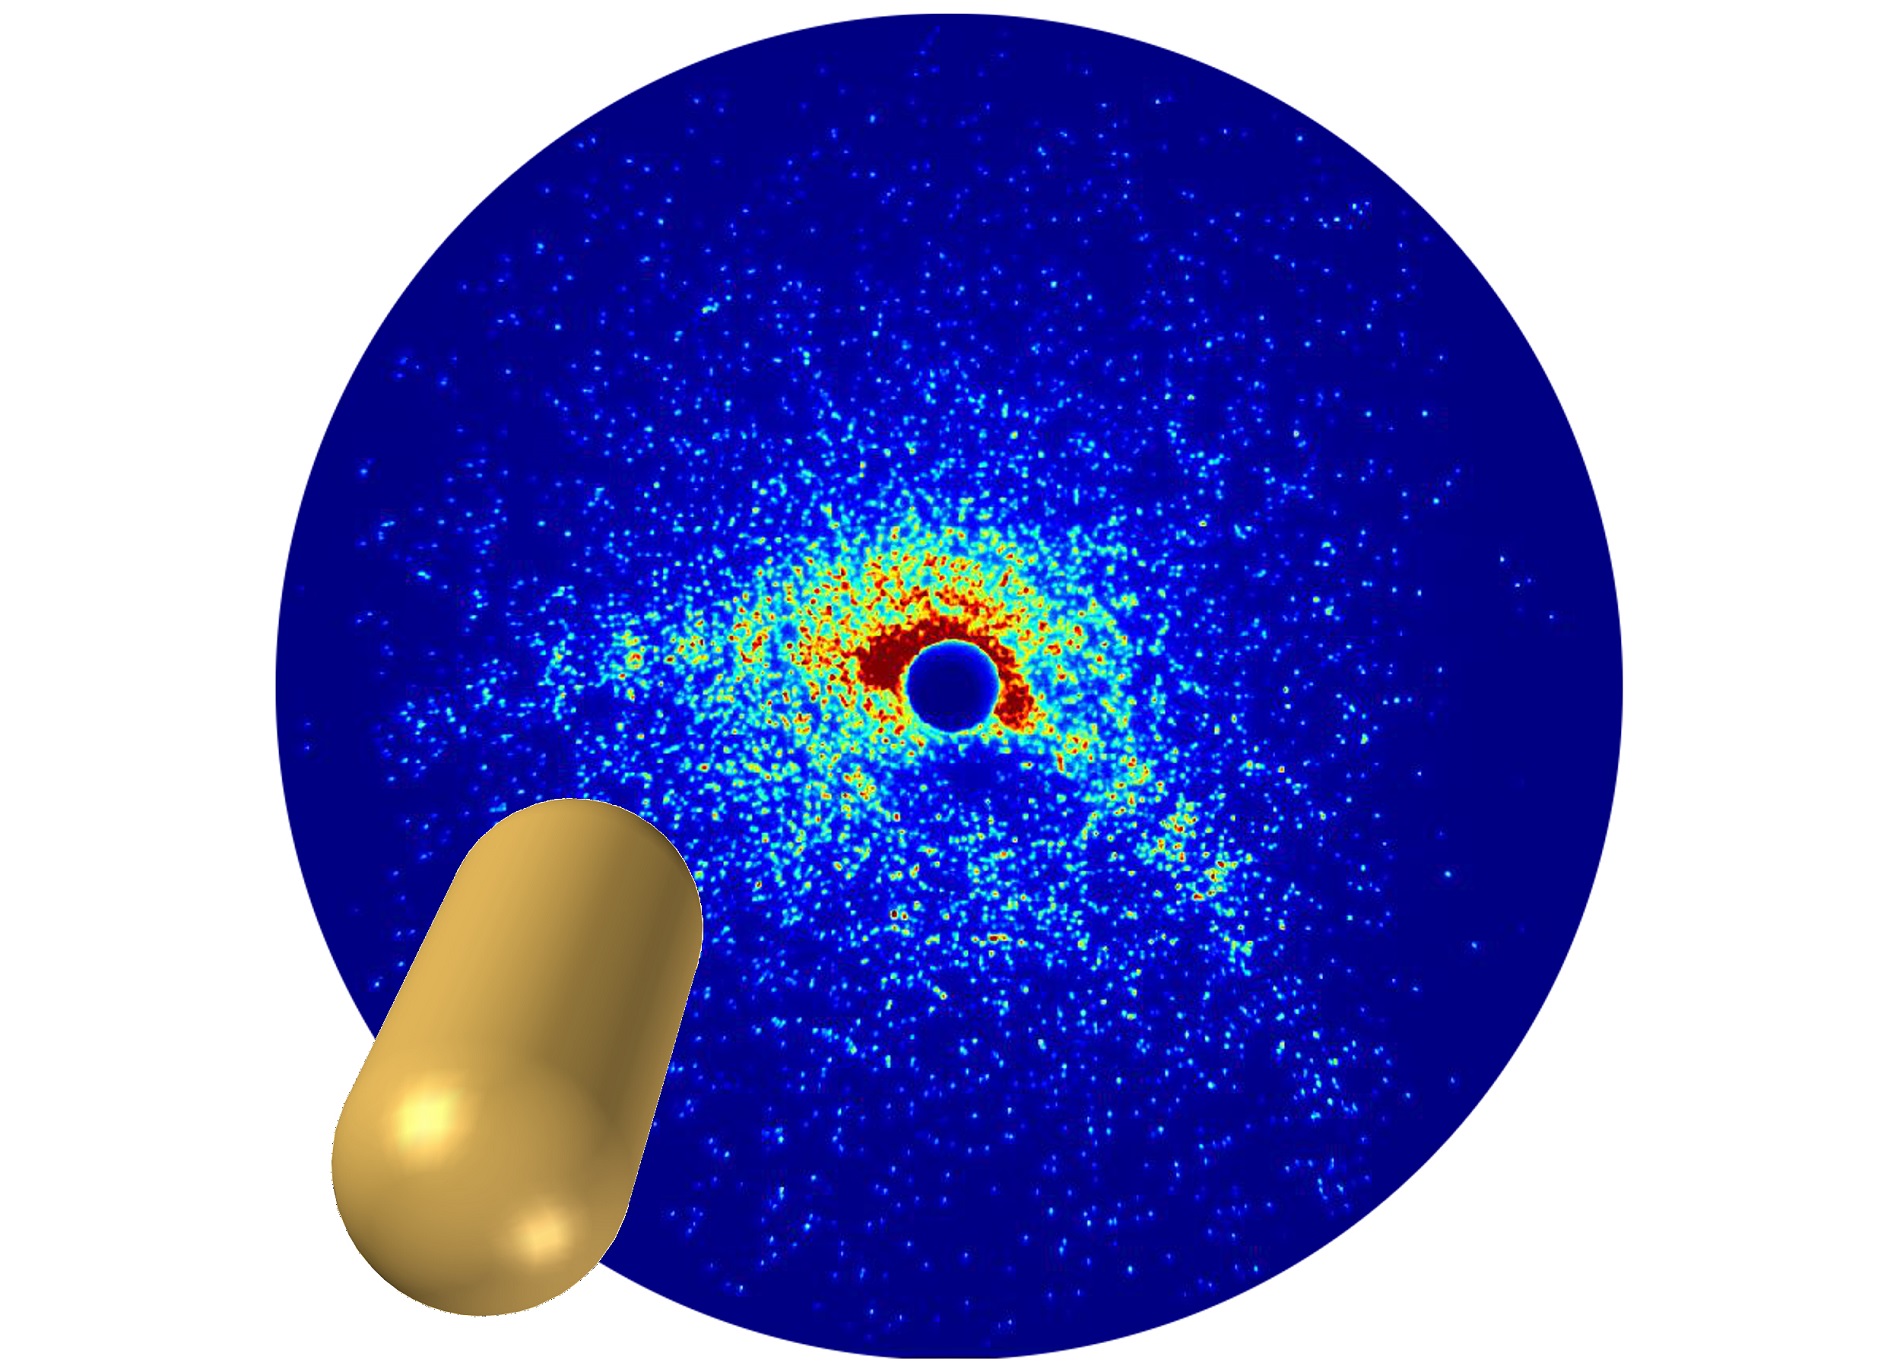 Pill-shaped helium nanodroplets can be detected through curved structures in the scatter image